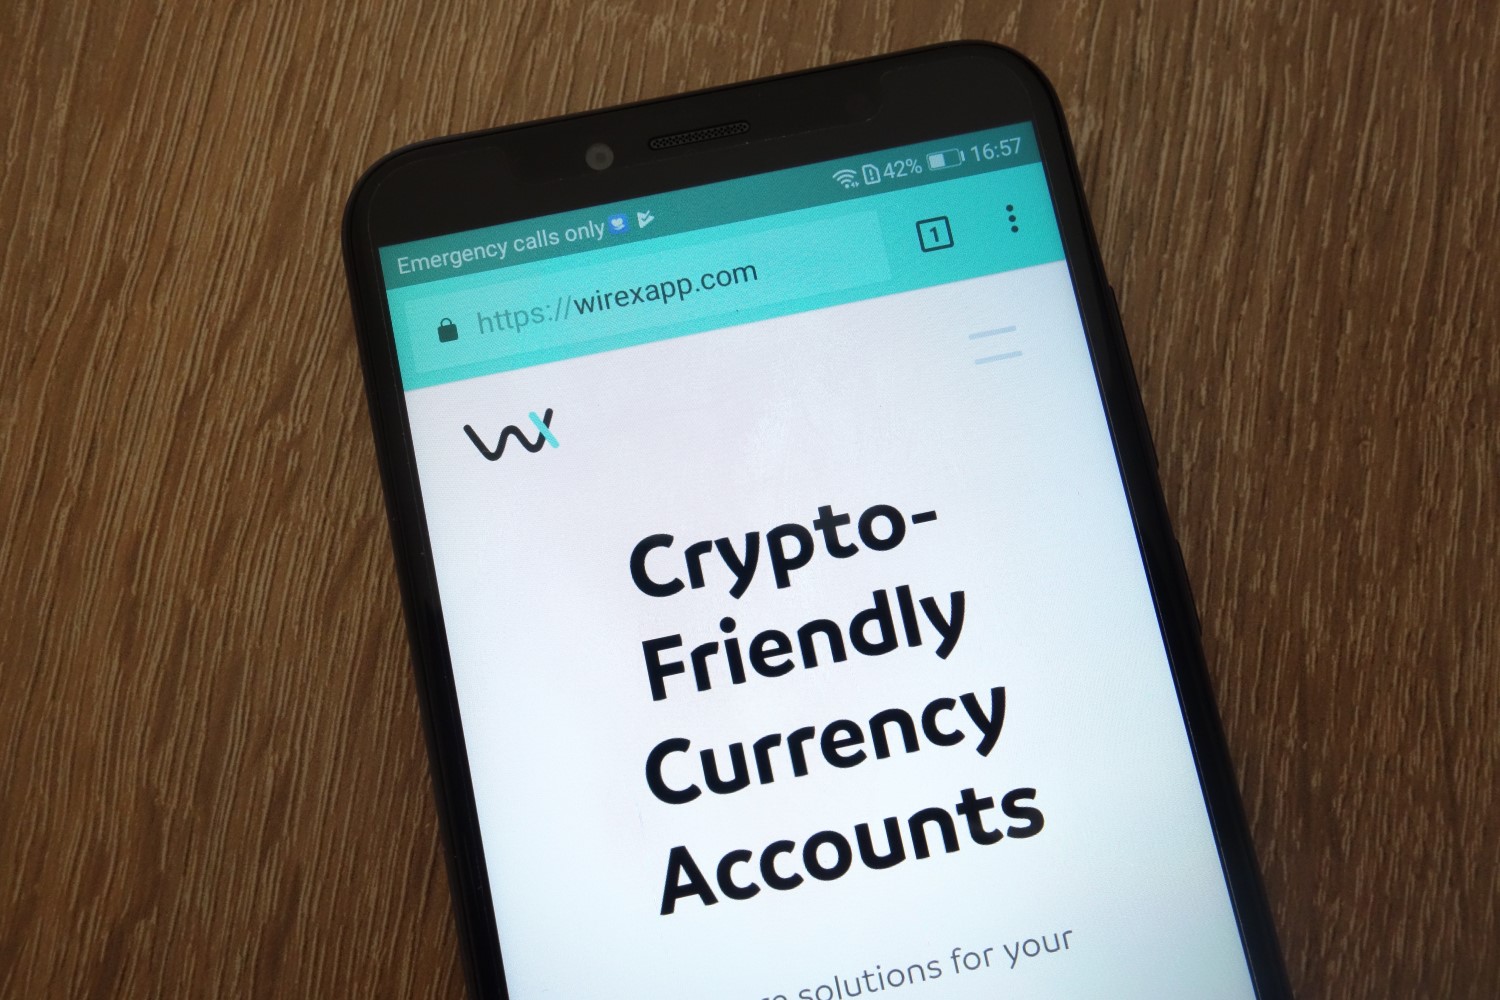 Wirex-taps-railsbank-to-replace-scandal-struck-wirecard-as-asia-pacific-card-provider